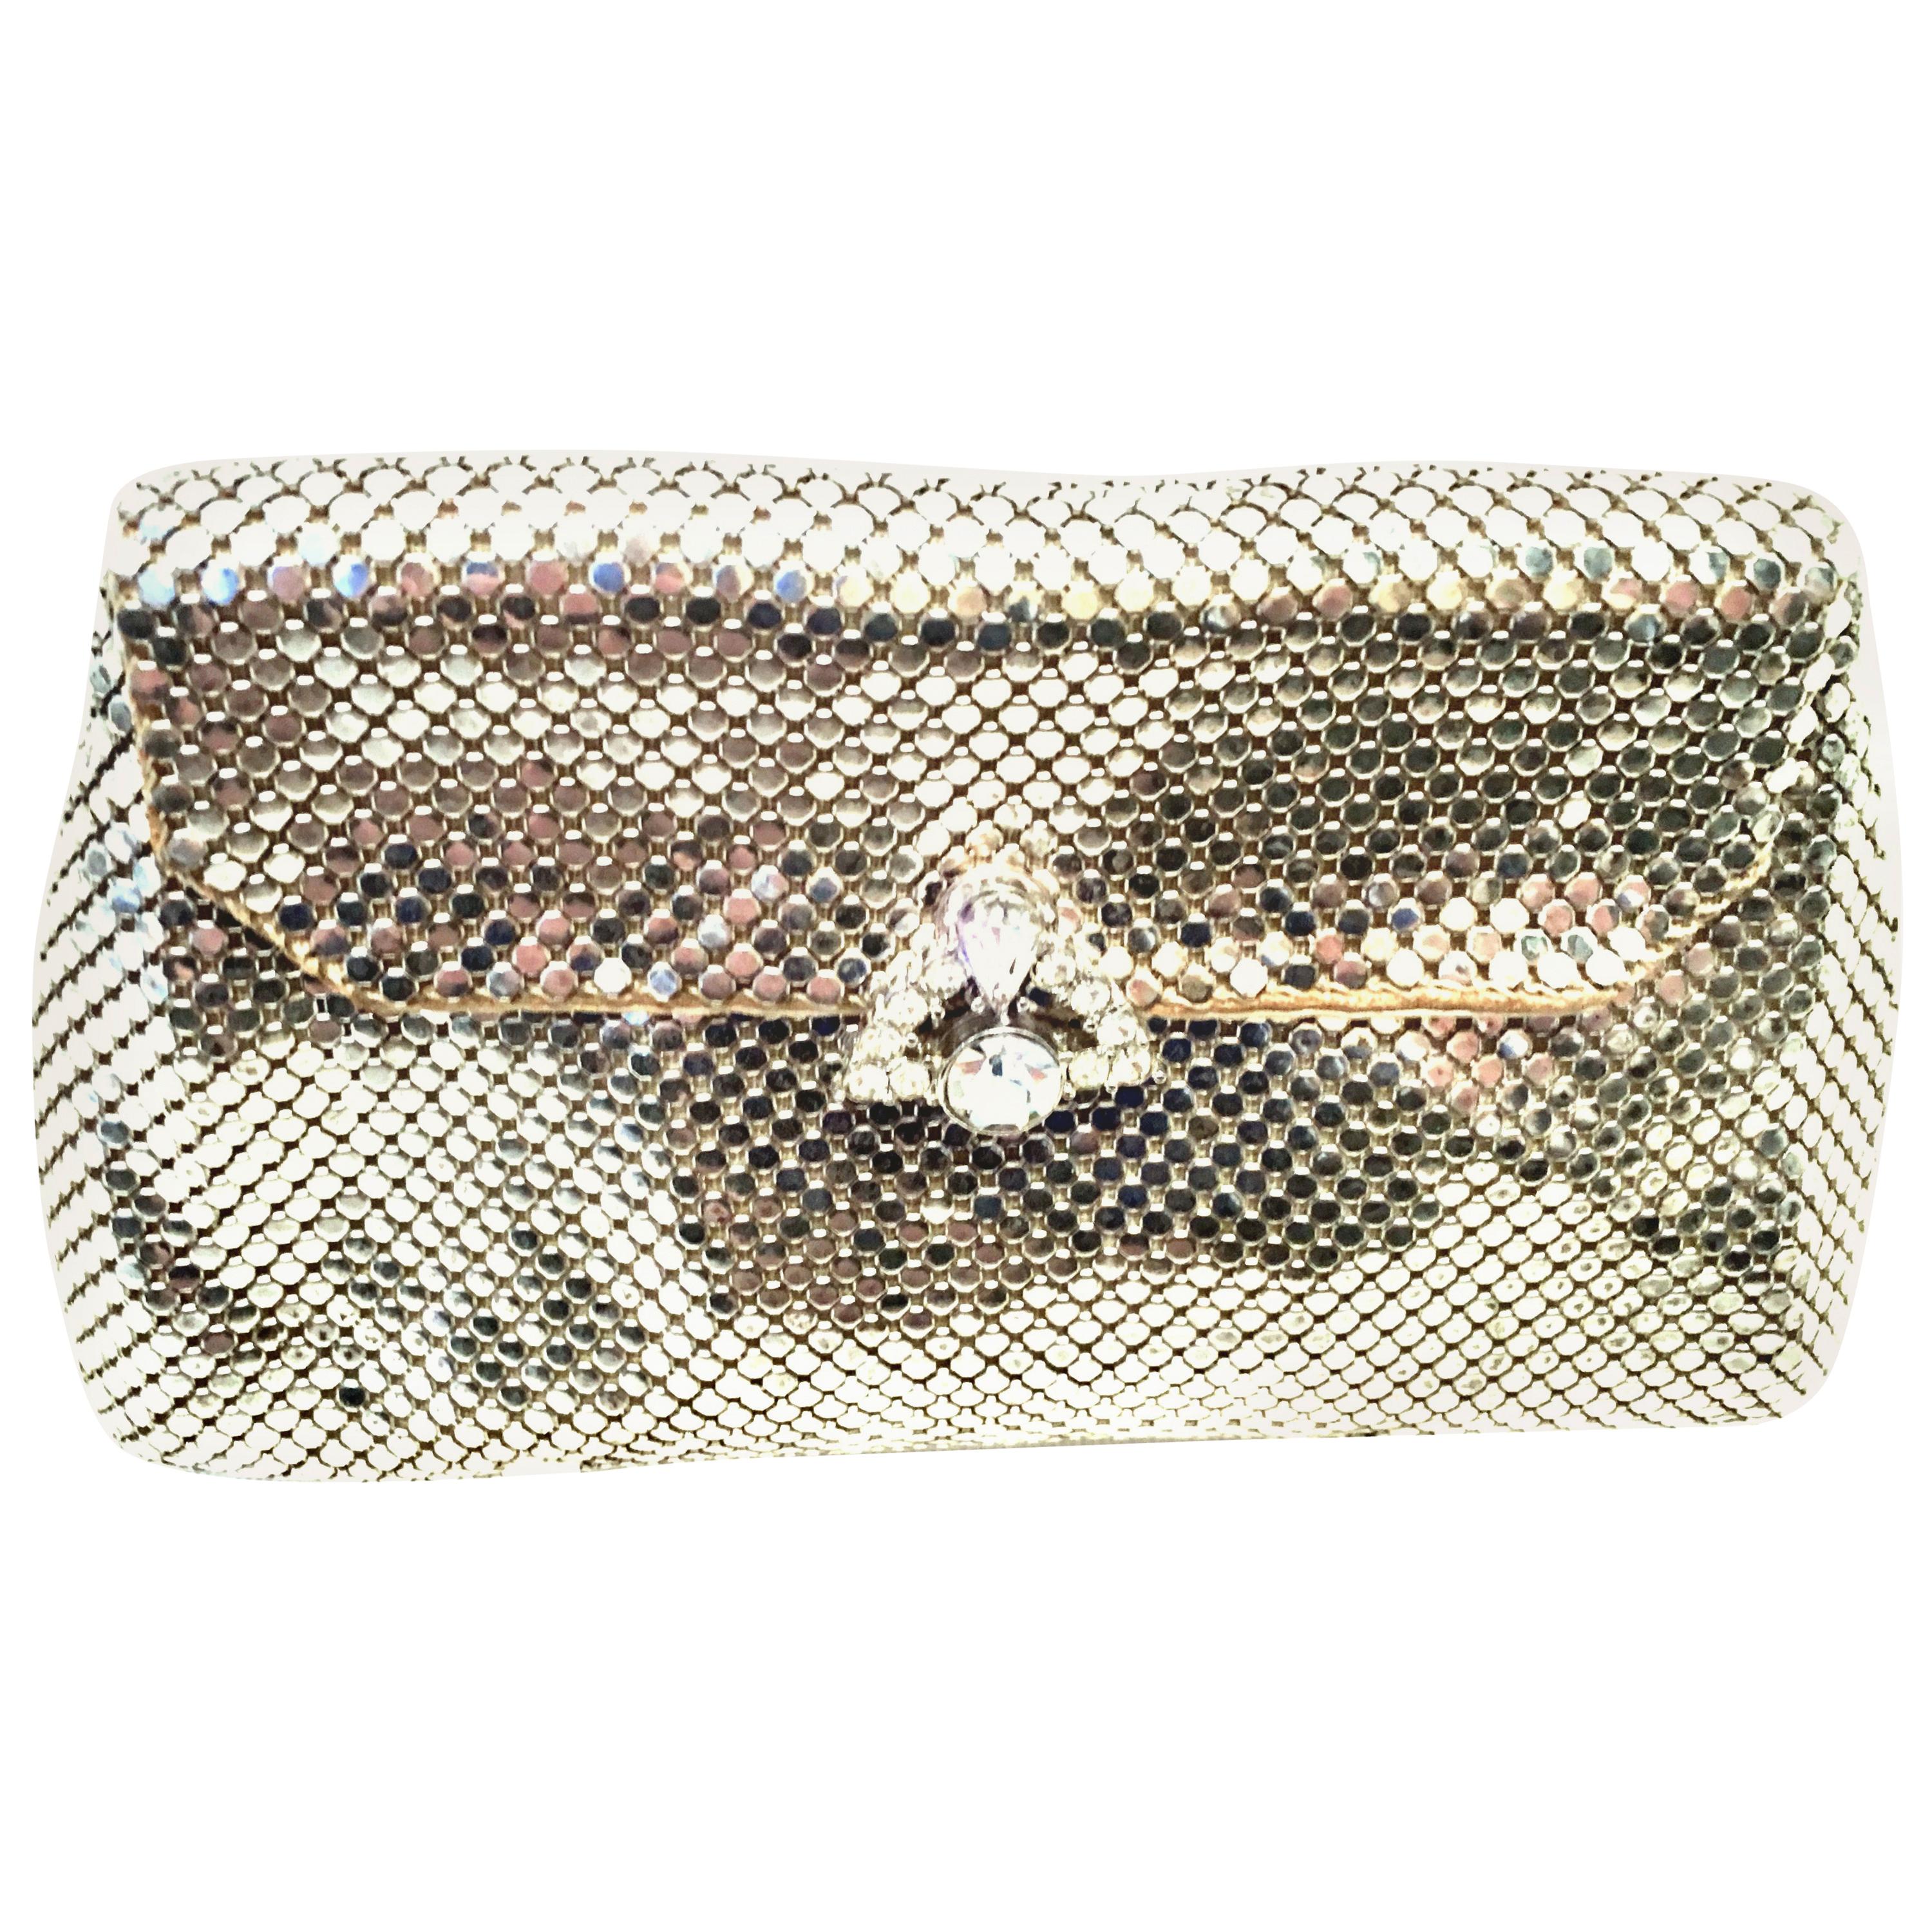 Mid-20th Century Silver Mesh & Austrian Crystal Evening Bag By, Whiting & Davis